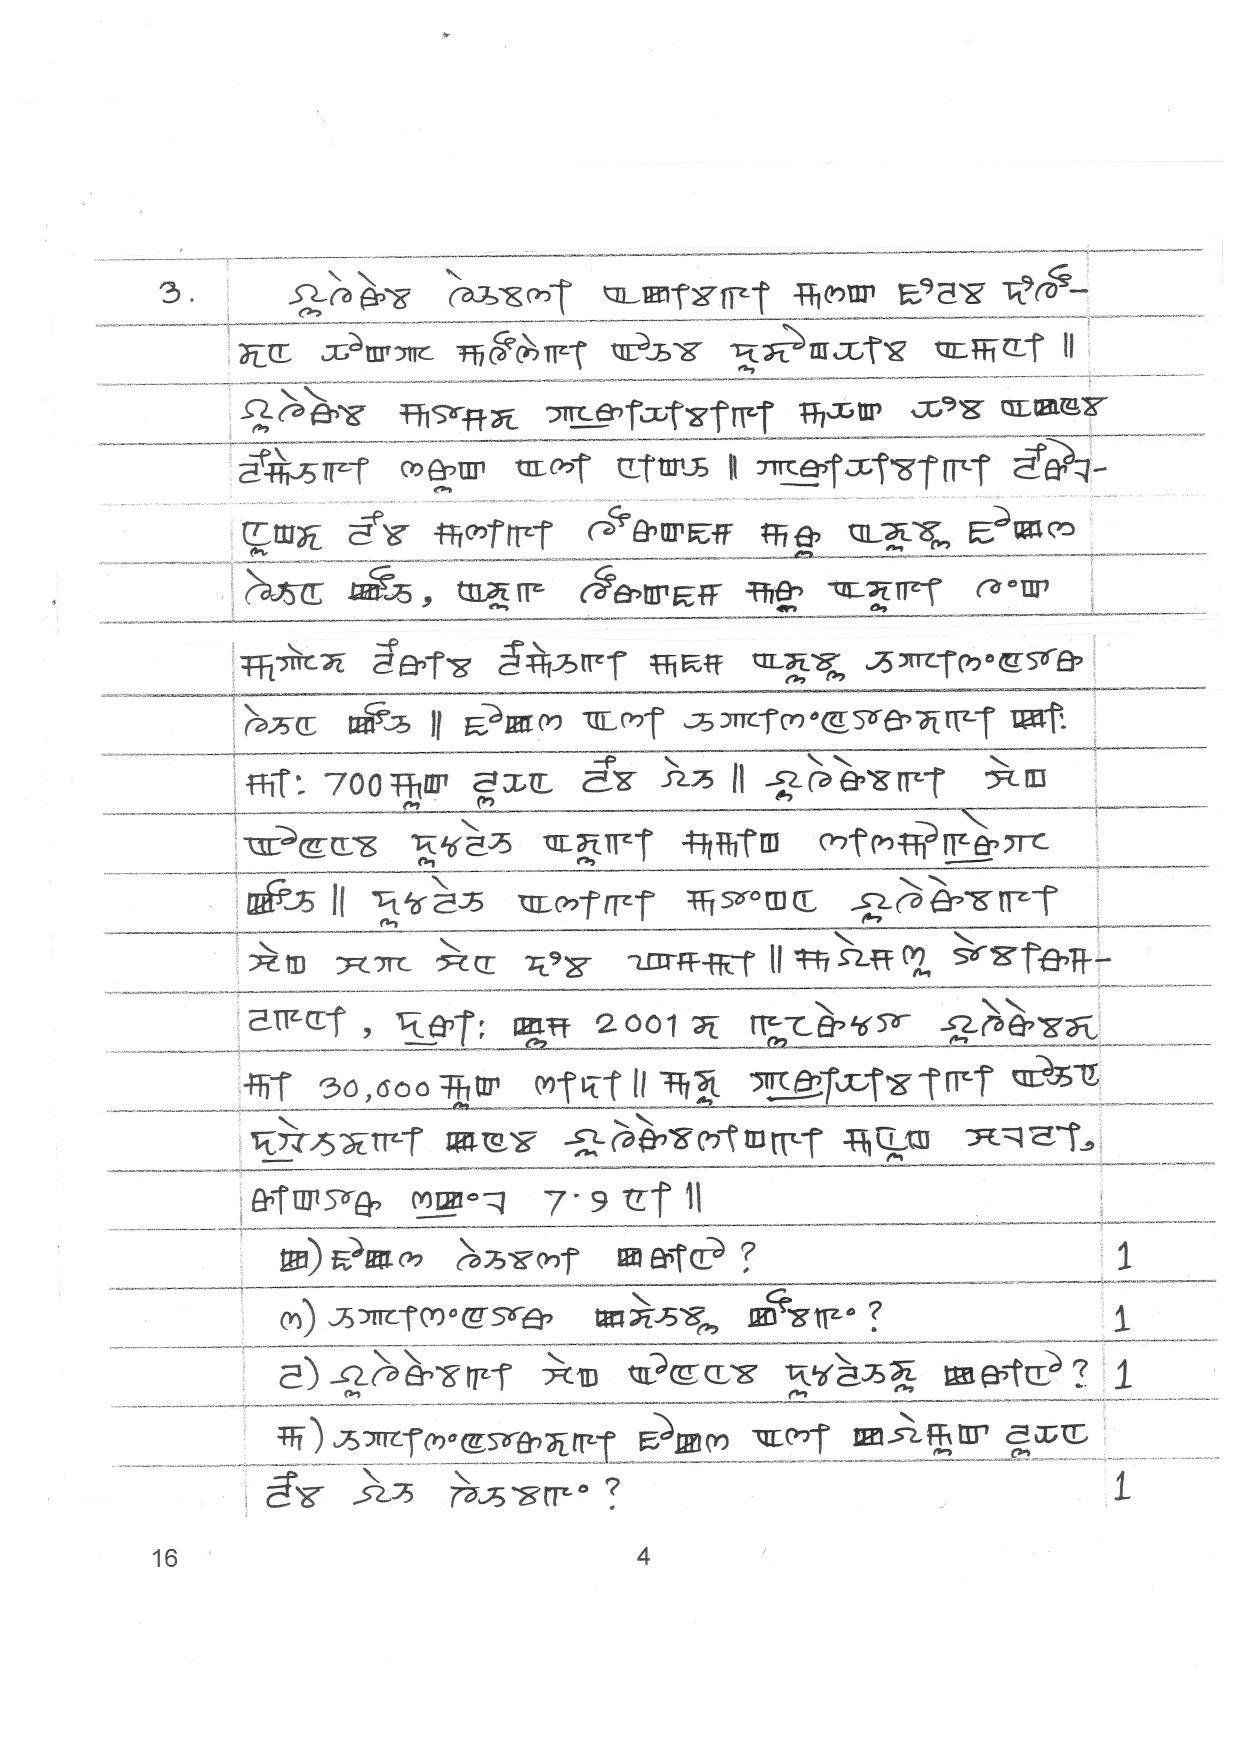 CBSE Class 10 16 Manipuri 2019 Compartment Question Paper - Page 4